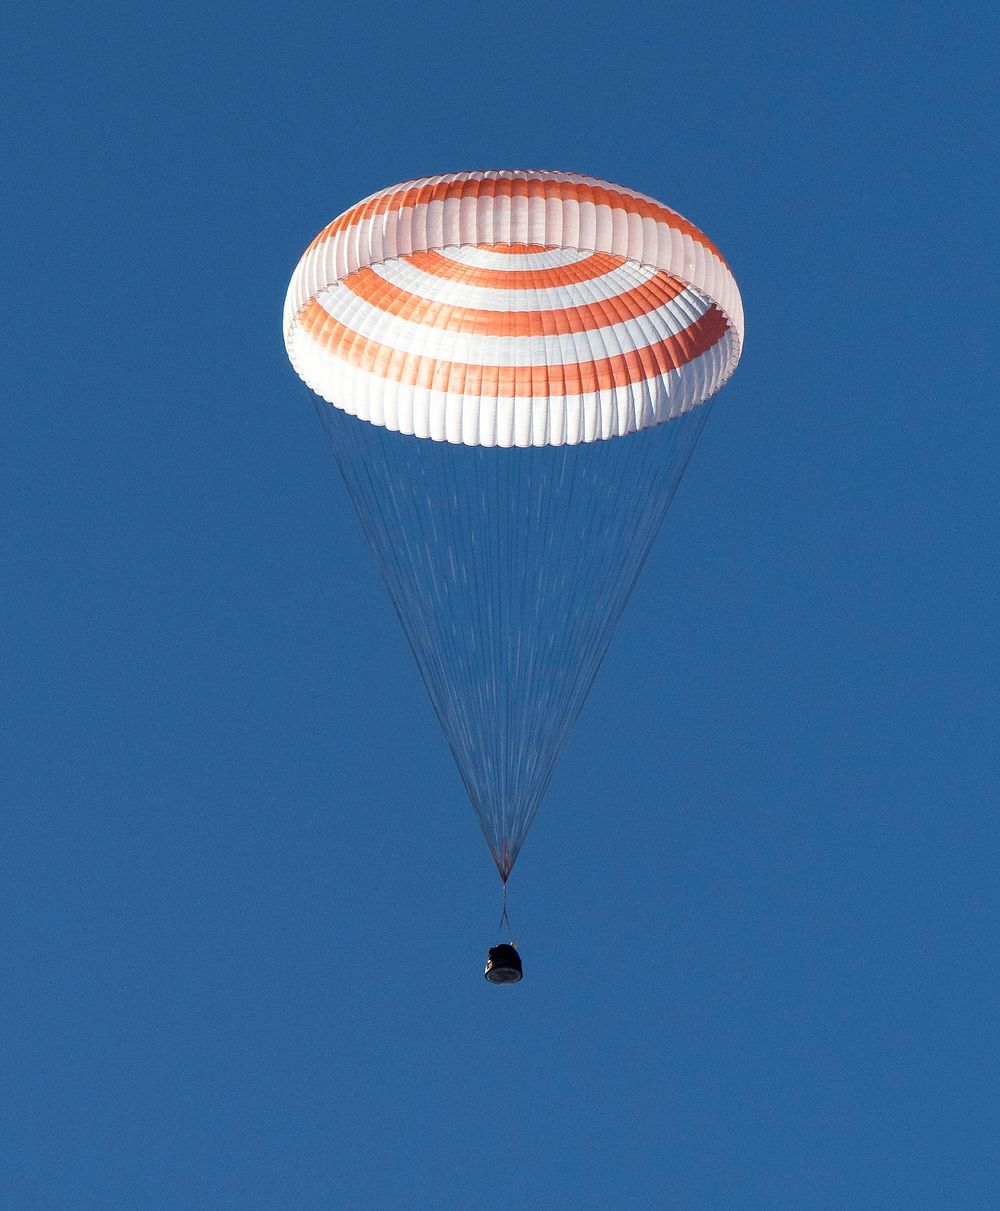 The Soyuz MS-02 spacecraft is seen as it lands with Expedition 50 near the town of Zhezkazgan, Kazakhstan, April 10, 2017.…